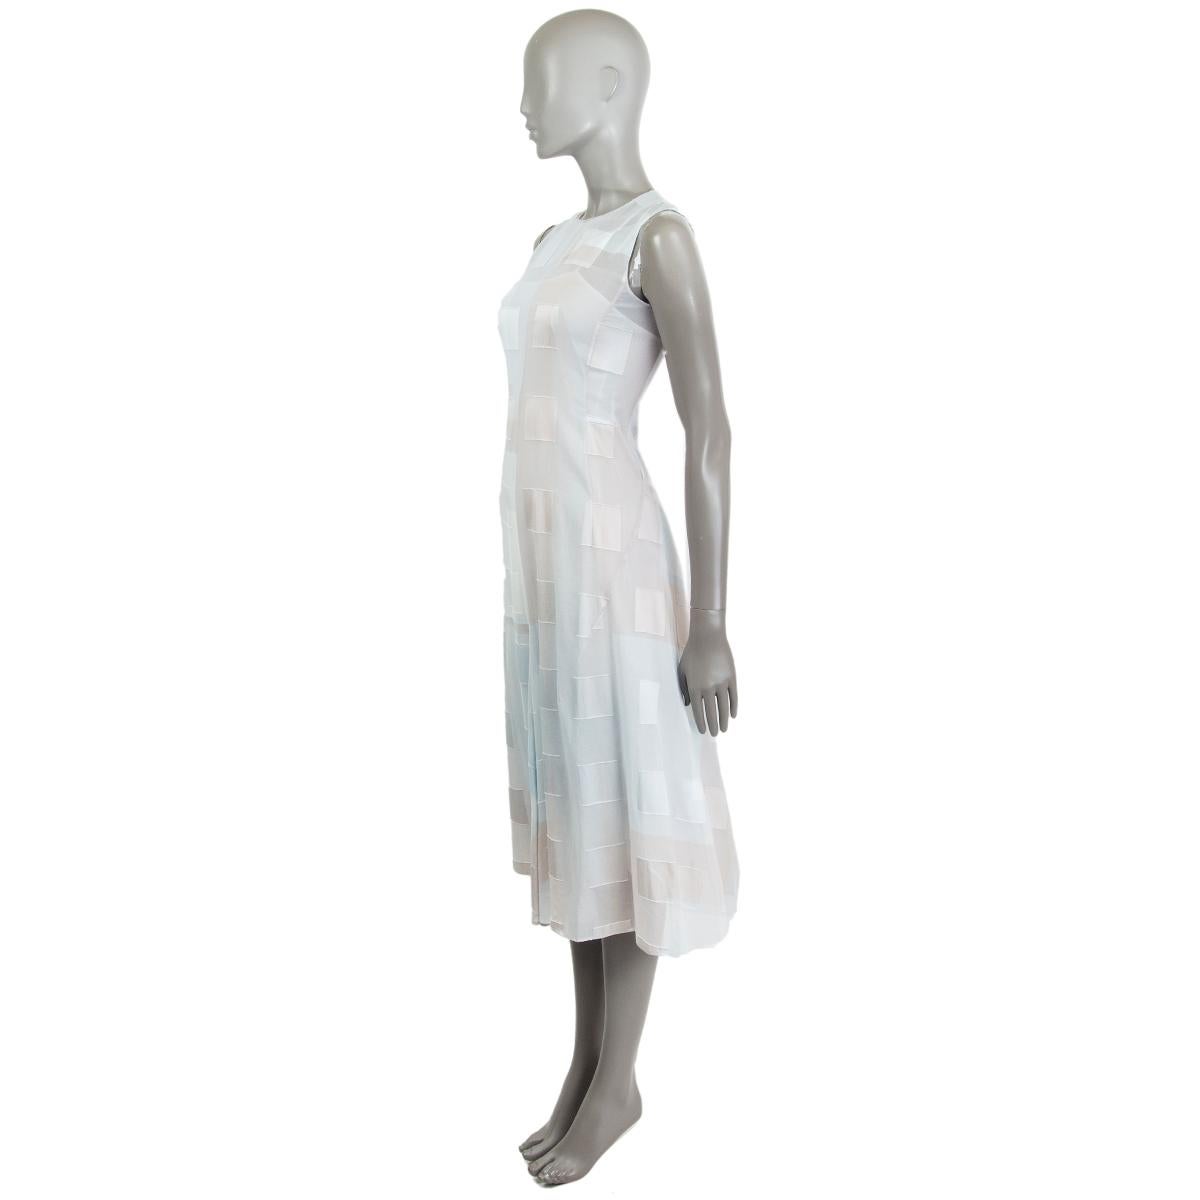 100% authentic Akris sleeveless sheer midi dress in light grey, inox, light blue and light taupe viscose (92%) and elastane (8%) with allover square details. Closes on the back with a concealed zipper. Comes with a slip in a light blue nylon blend